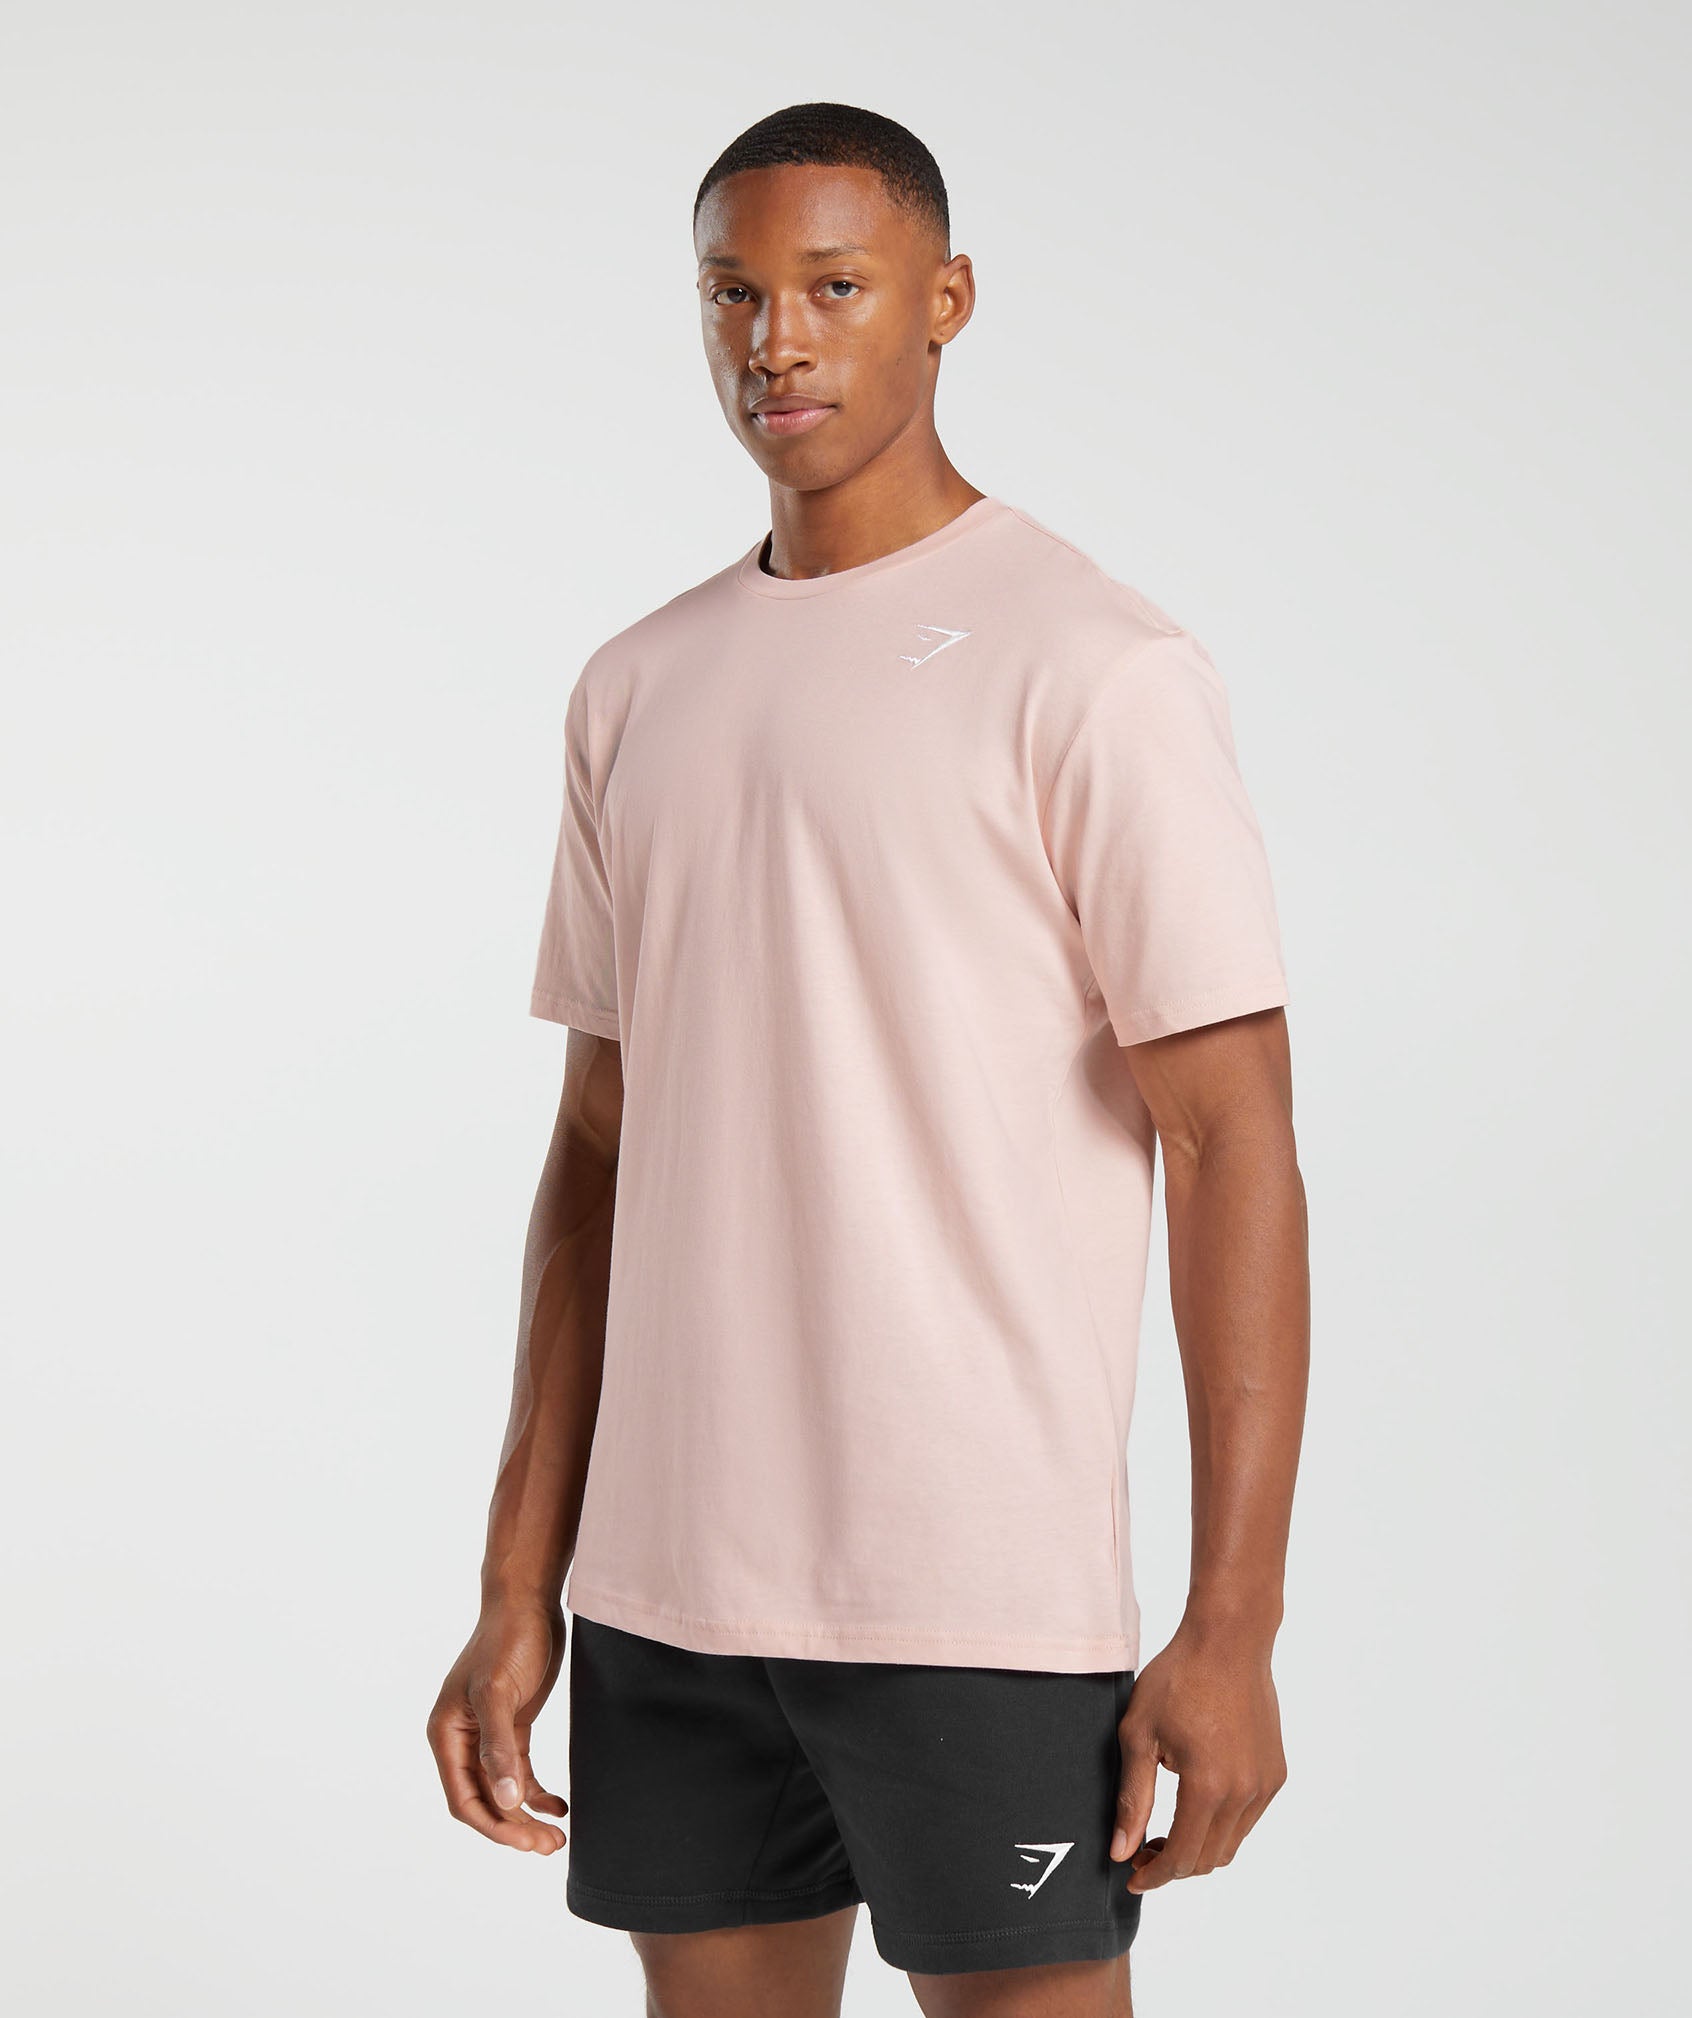 Crest T-Shirt in Misty Pink - view 3